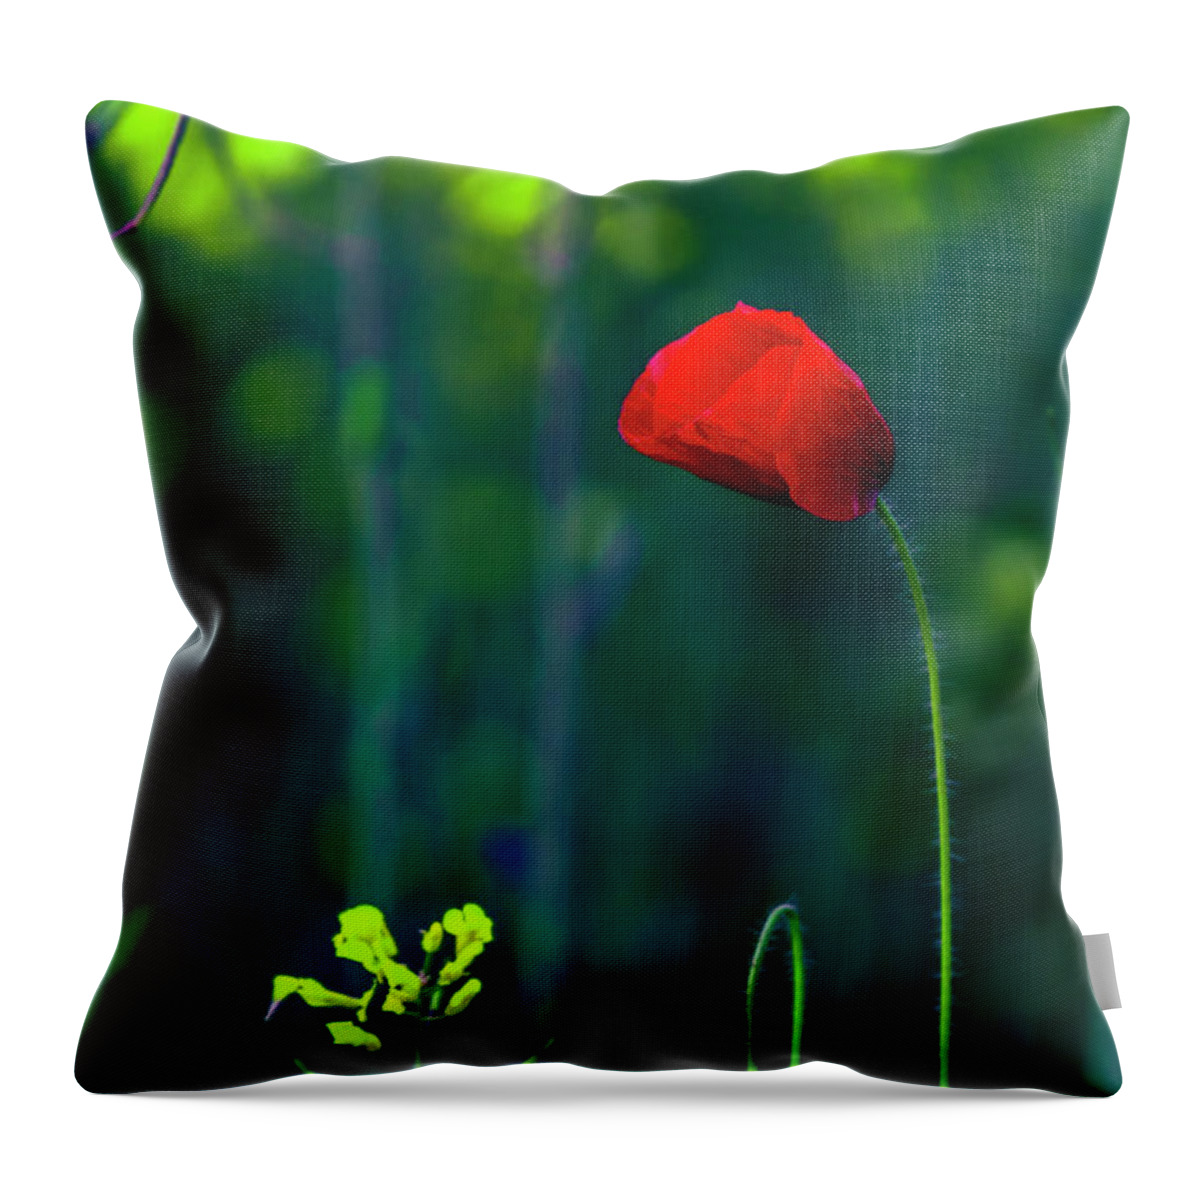 Bulgaria Throw Pillow featuring the photograph Poppy by Evgeni Dinev